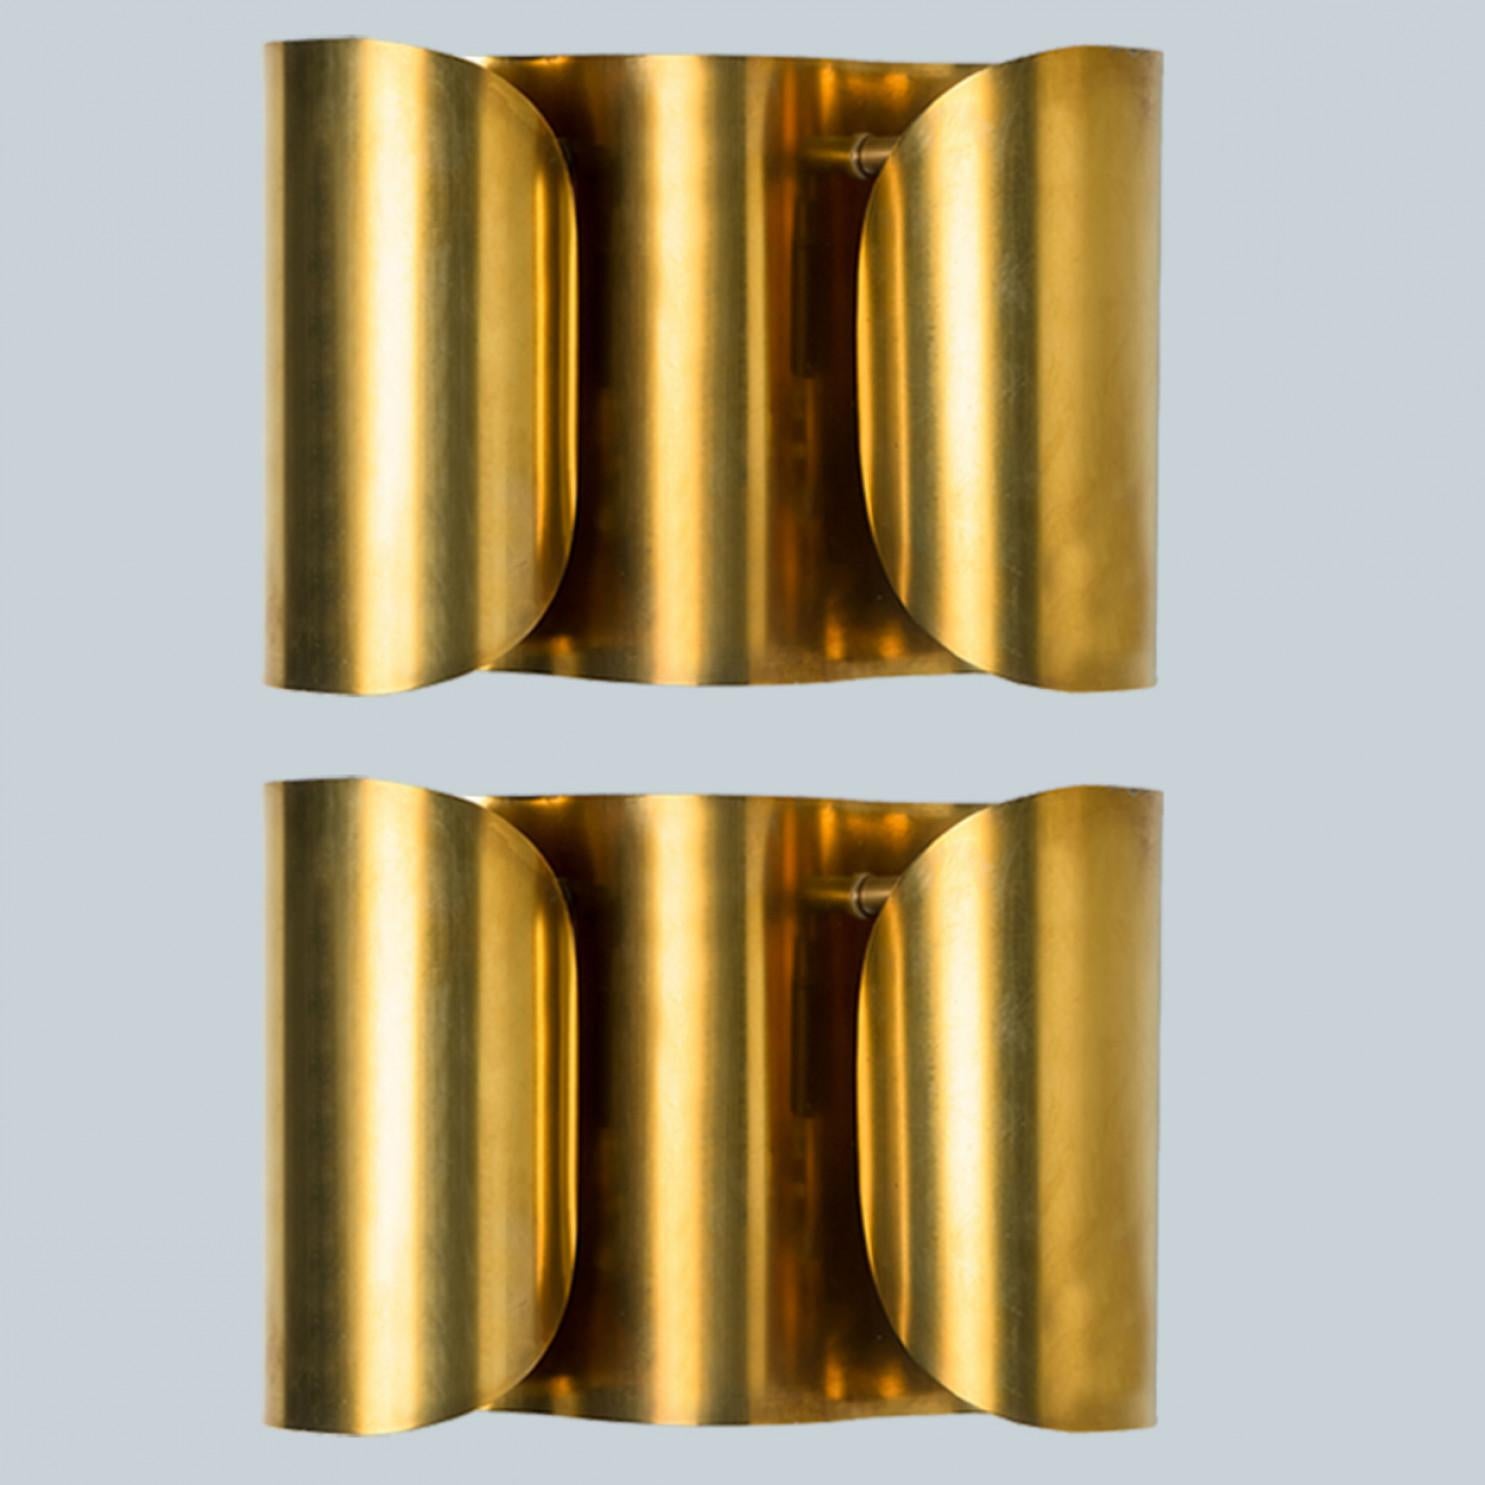 Beautiful  brass wall lights. Original and well kept. Each wall light  composed of a large sheet of brass curled towards the middle, with a bulb in the middle.

The wall lamp suits many environments, from mid century to Hollywood Regency, from